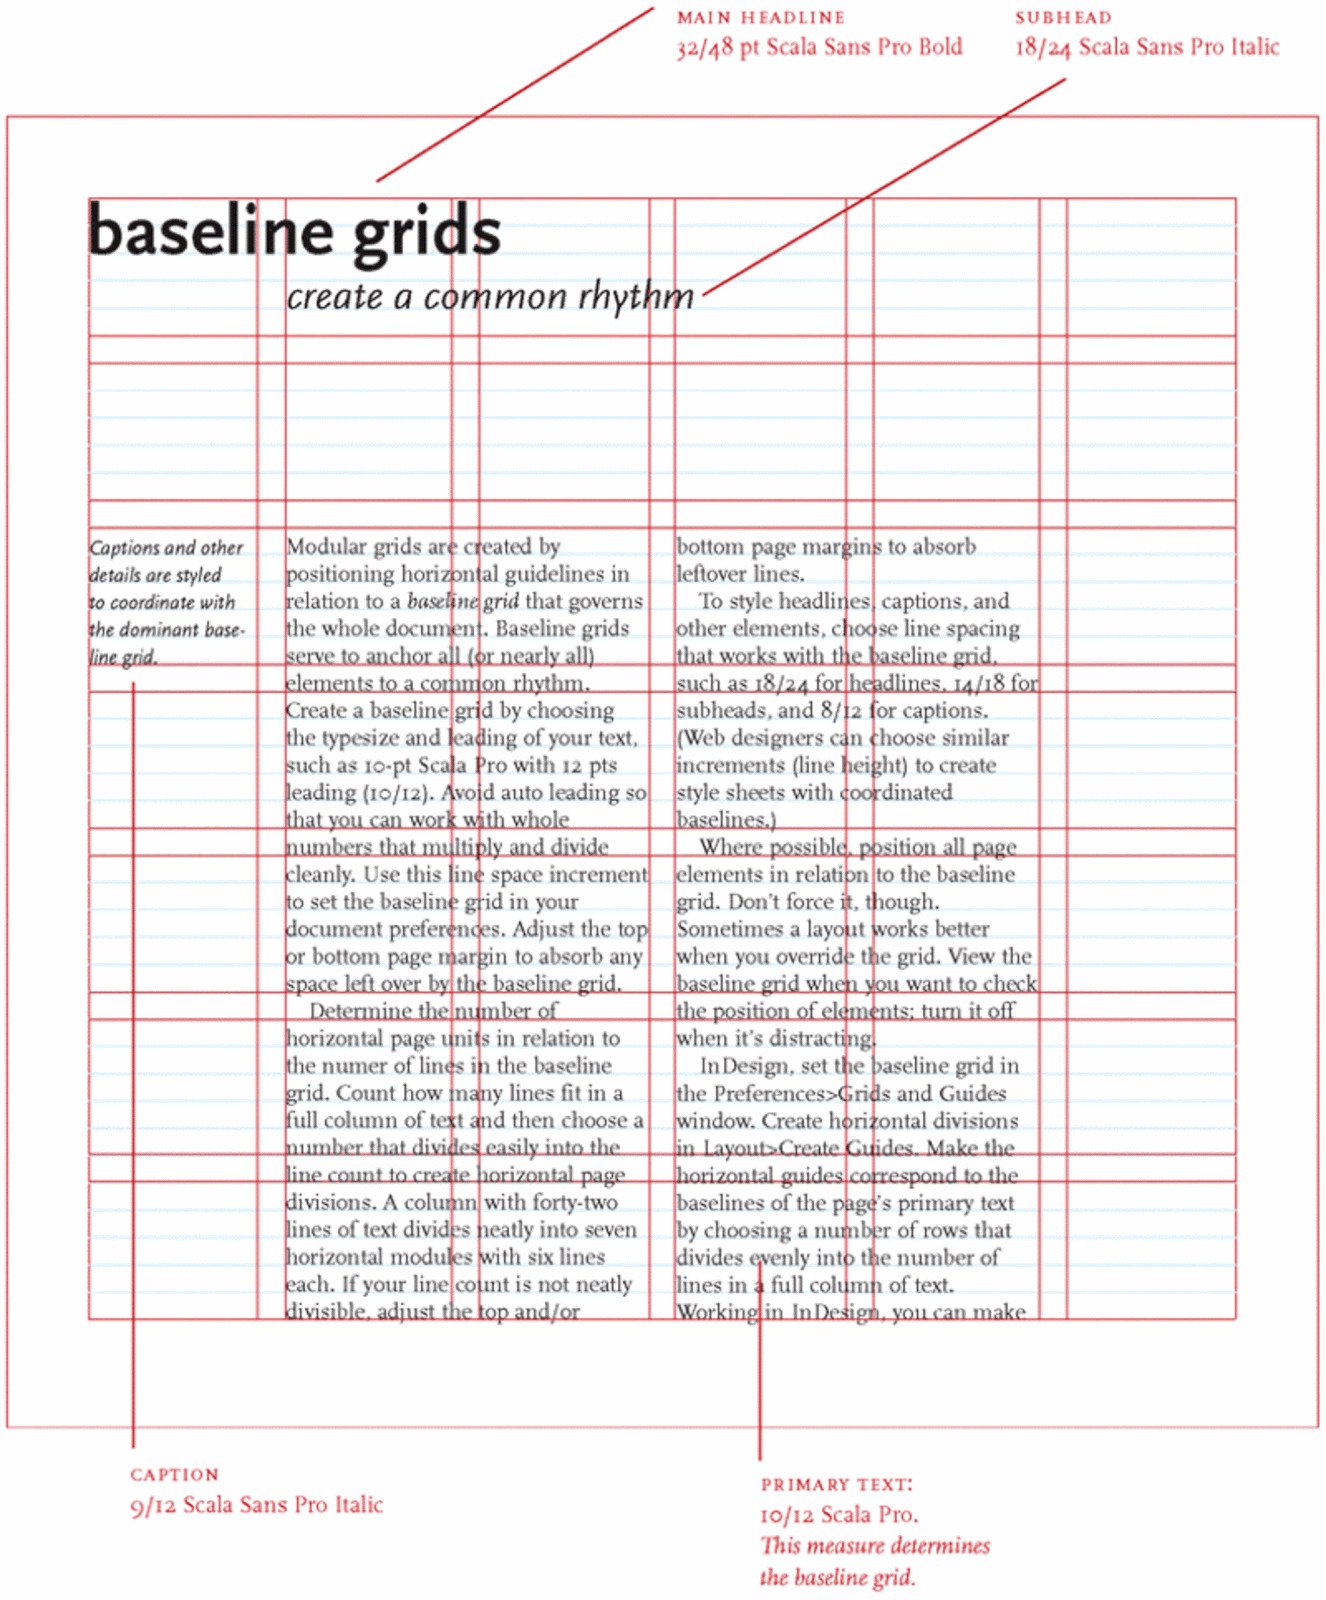 A baseline grid shapes the vertical spacing of a design.